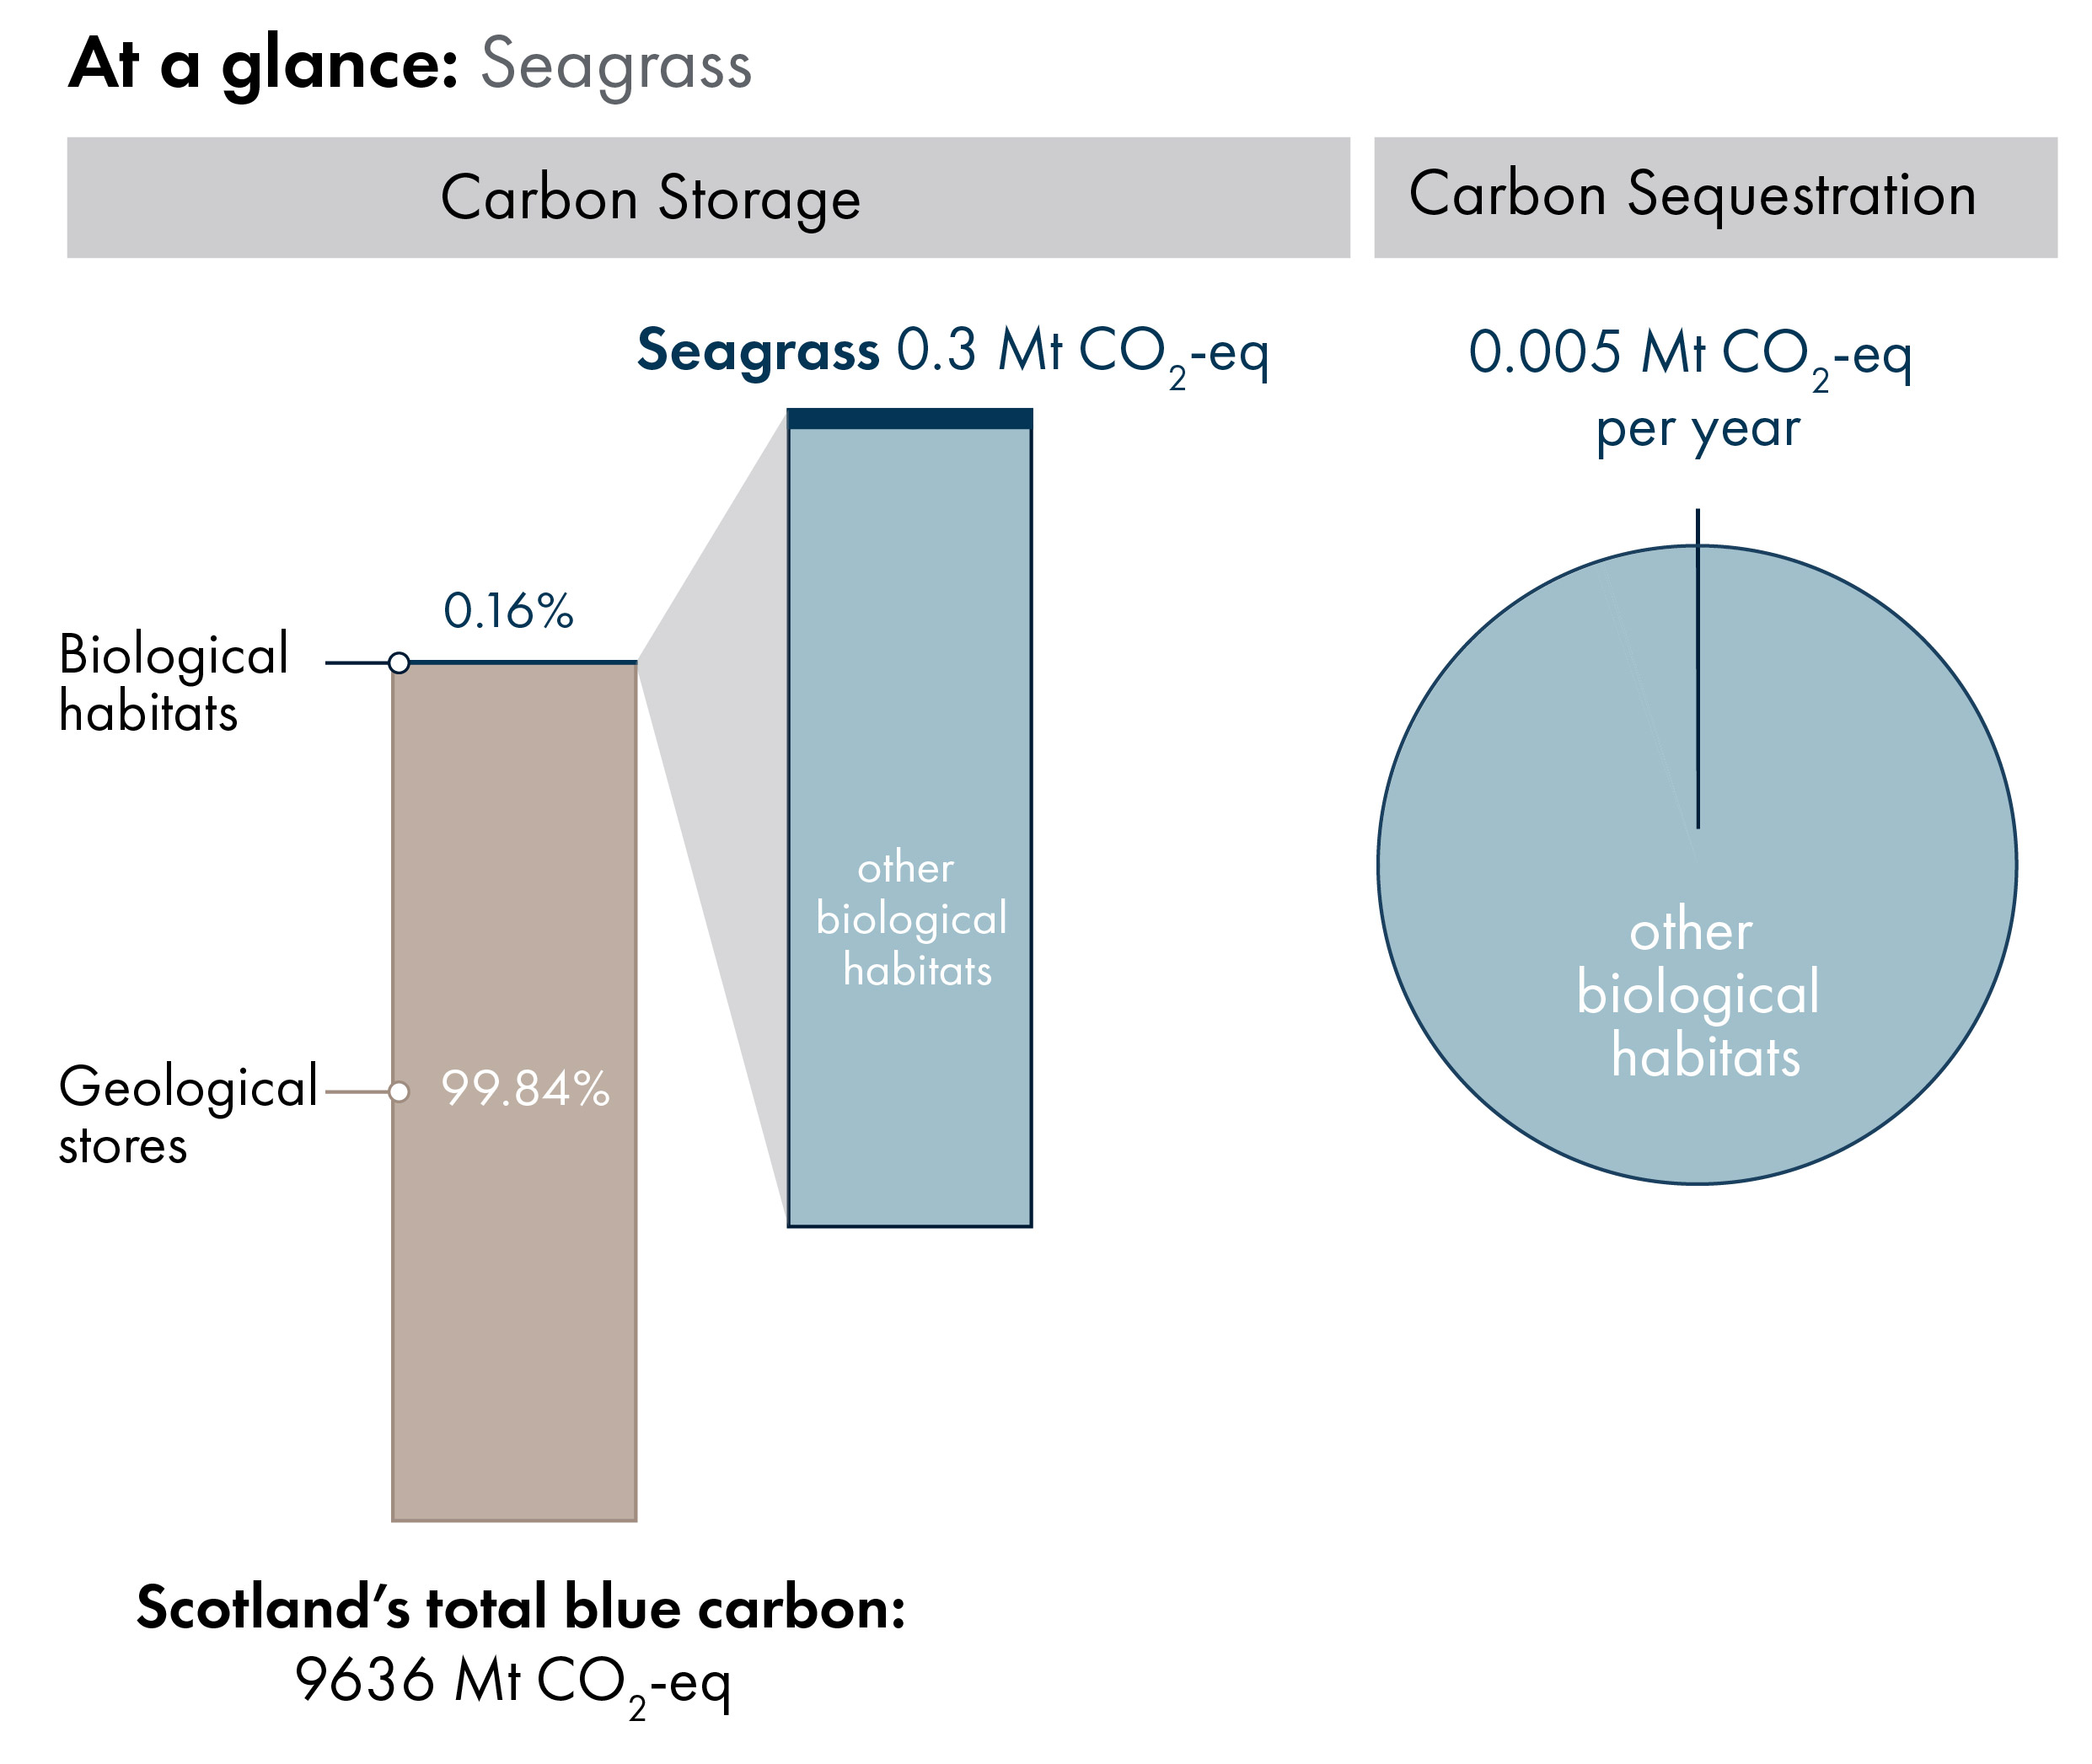 Bar charts showing the proportion of Scotland's blue carbon which is in geological stores (99.84%) versus carbon in biological habitats and species (0.16%). Inset bar chart shows the proportion of carbon in biological habitats which is seagrass carbon storage (0.3 megatonnes of carbon dioxide equivalent). Pie chart showing, out of all biological habitats, the proportion which is sequestered annually by seagrasses.